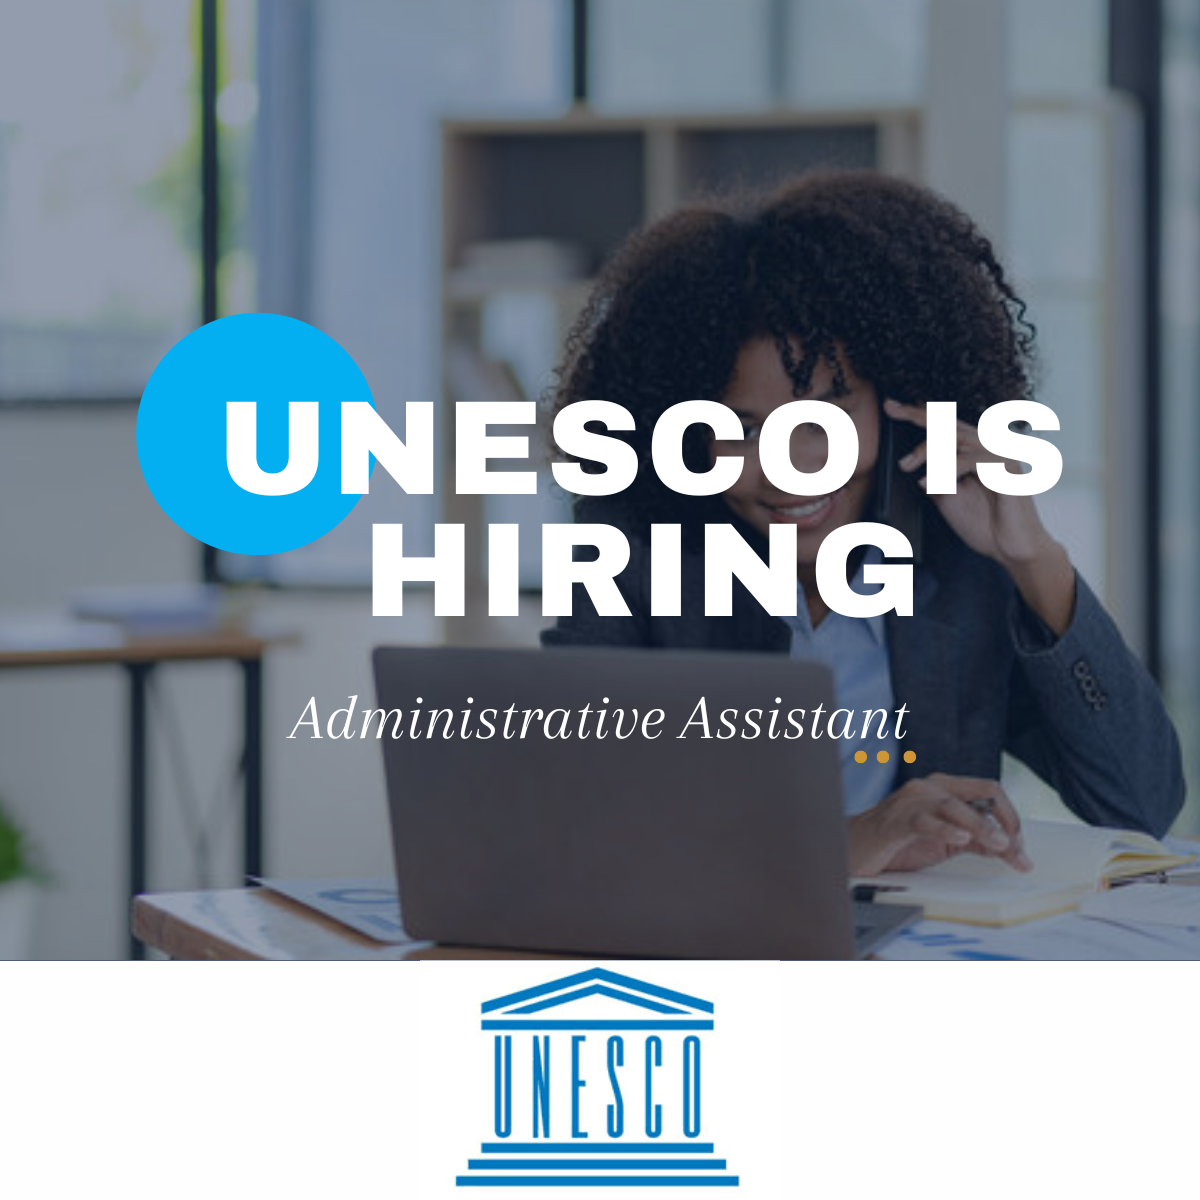 Don't miss out on the chance to work as an Administrative Assistant at UNESCO! Apply Today